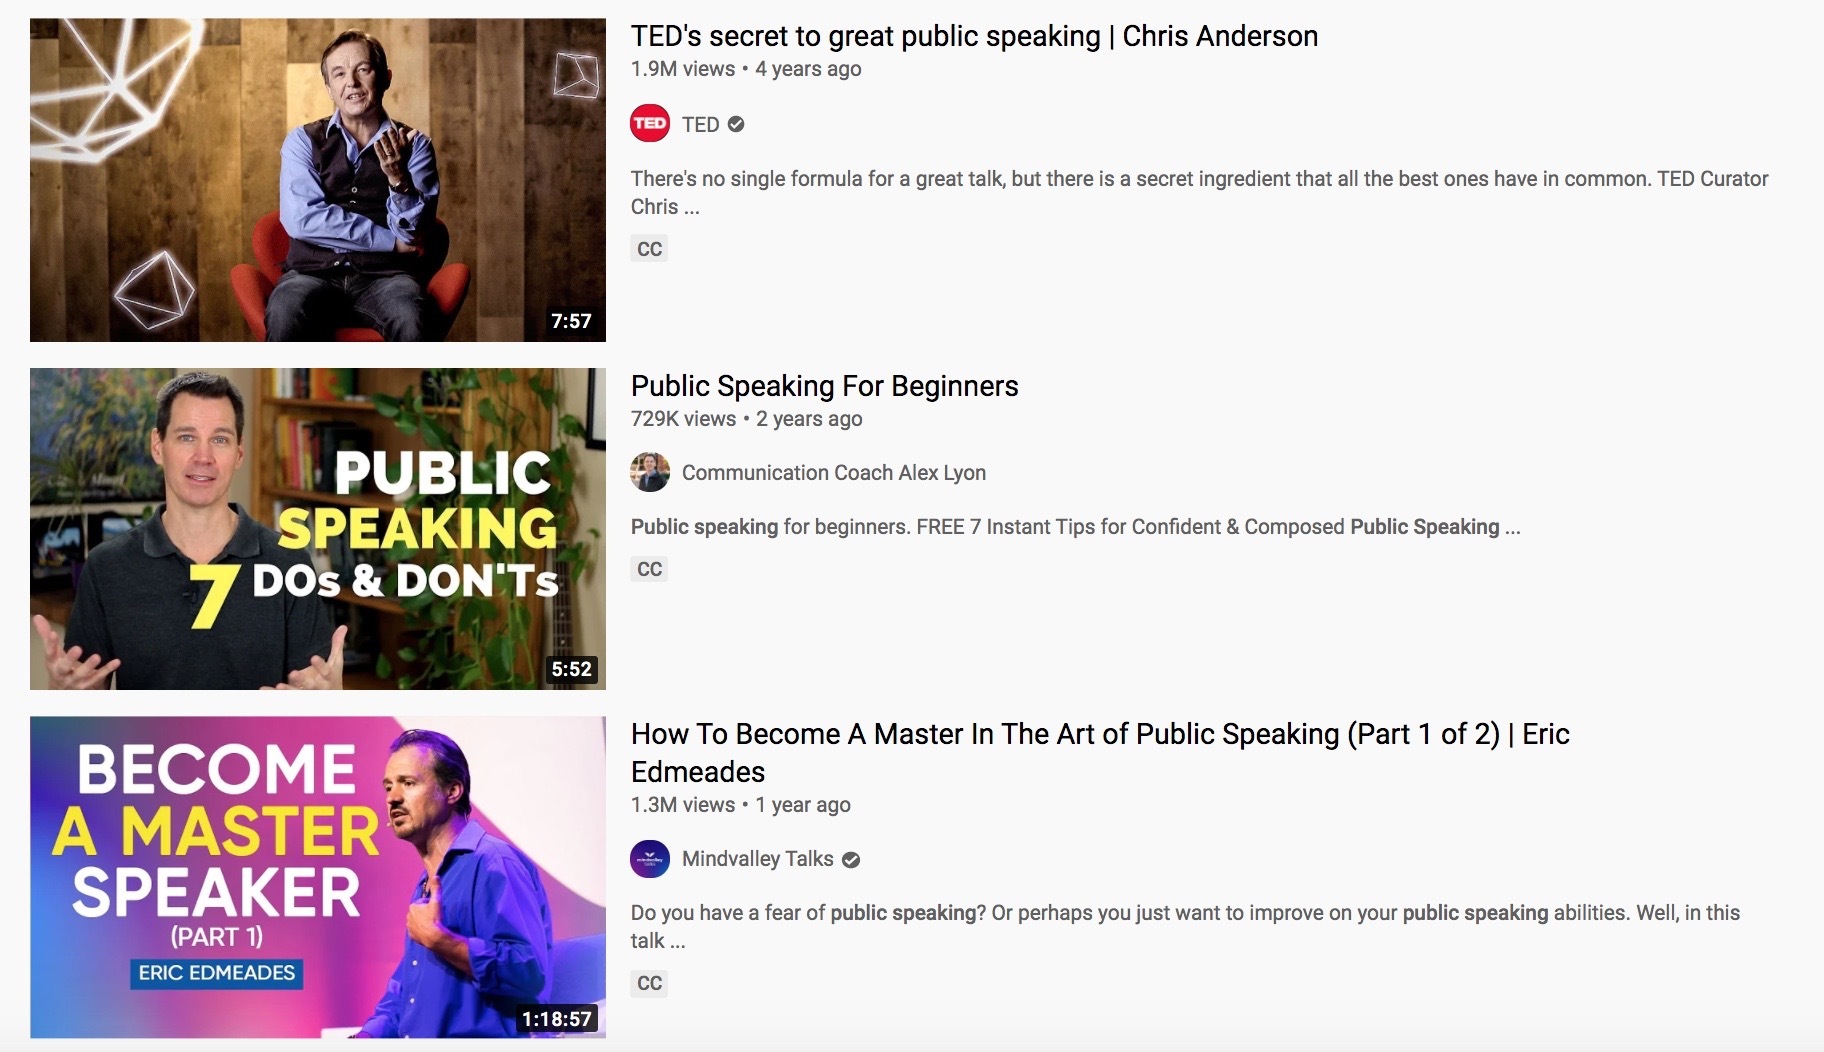 Look at the top-ranking videos. They all feature compelling thumbnails crafted to optimize click-through-rate.